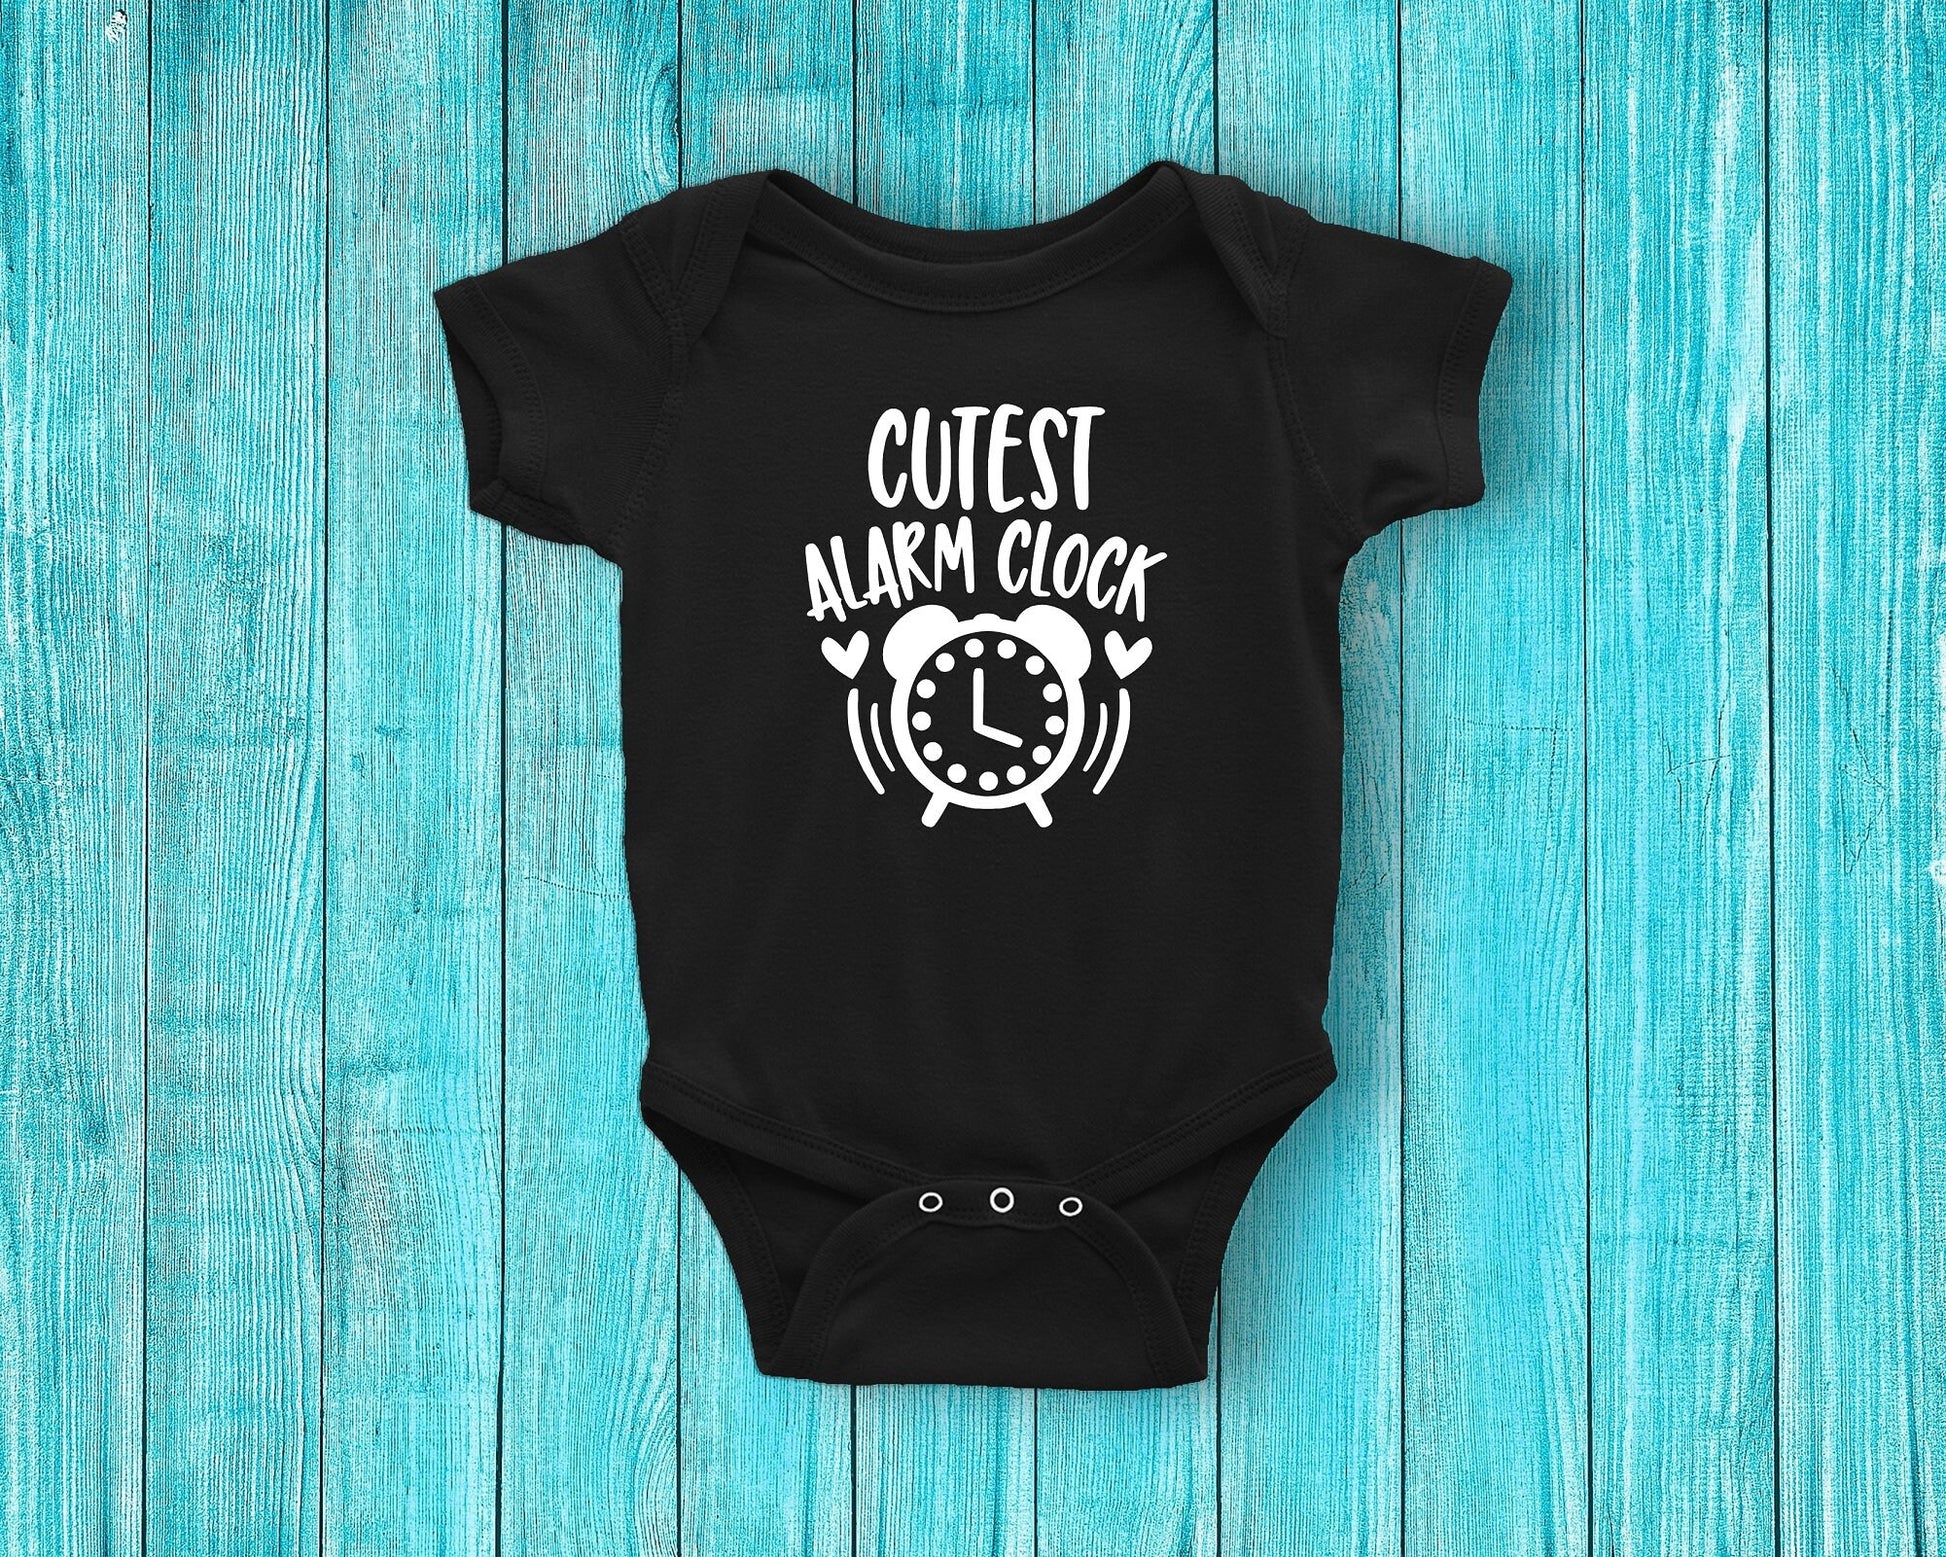 Cutest Alarm Clock Infant Shirt or Bodysuit - Cute Baby Shirt - baby shower gift - mommy needs sleep - mommy needs coffee - funny baby